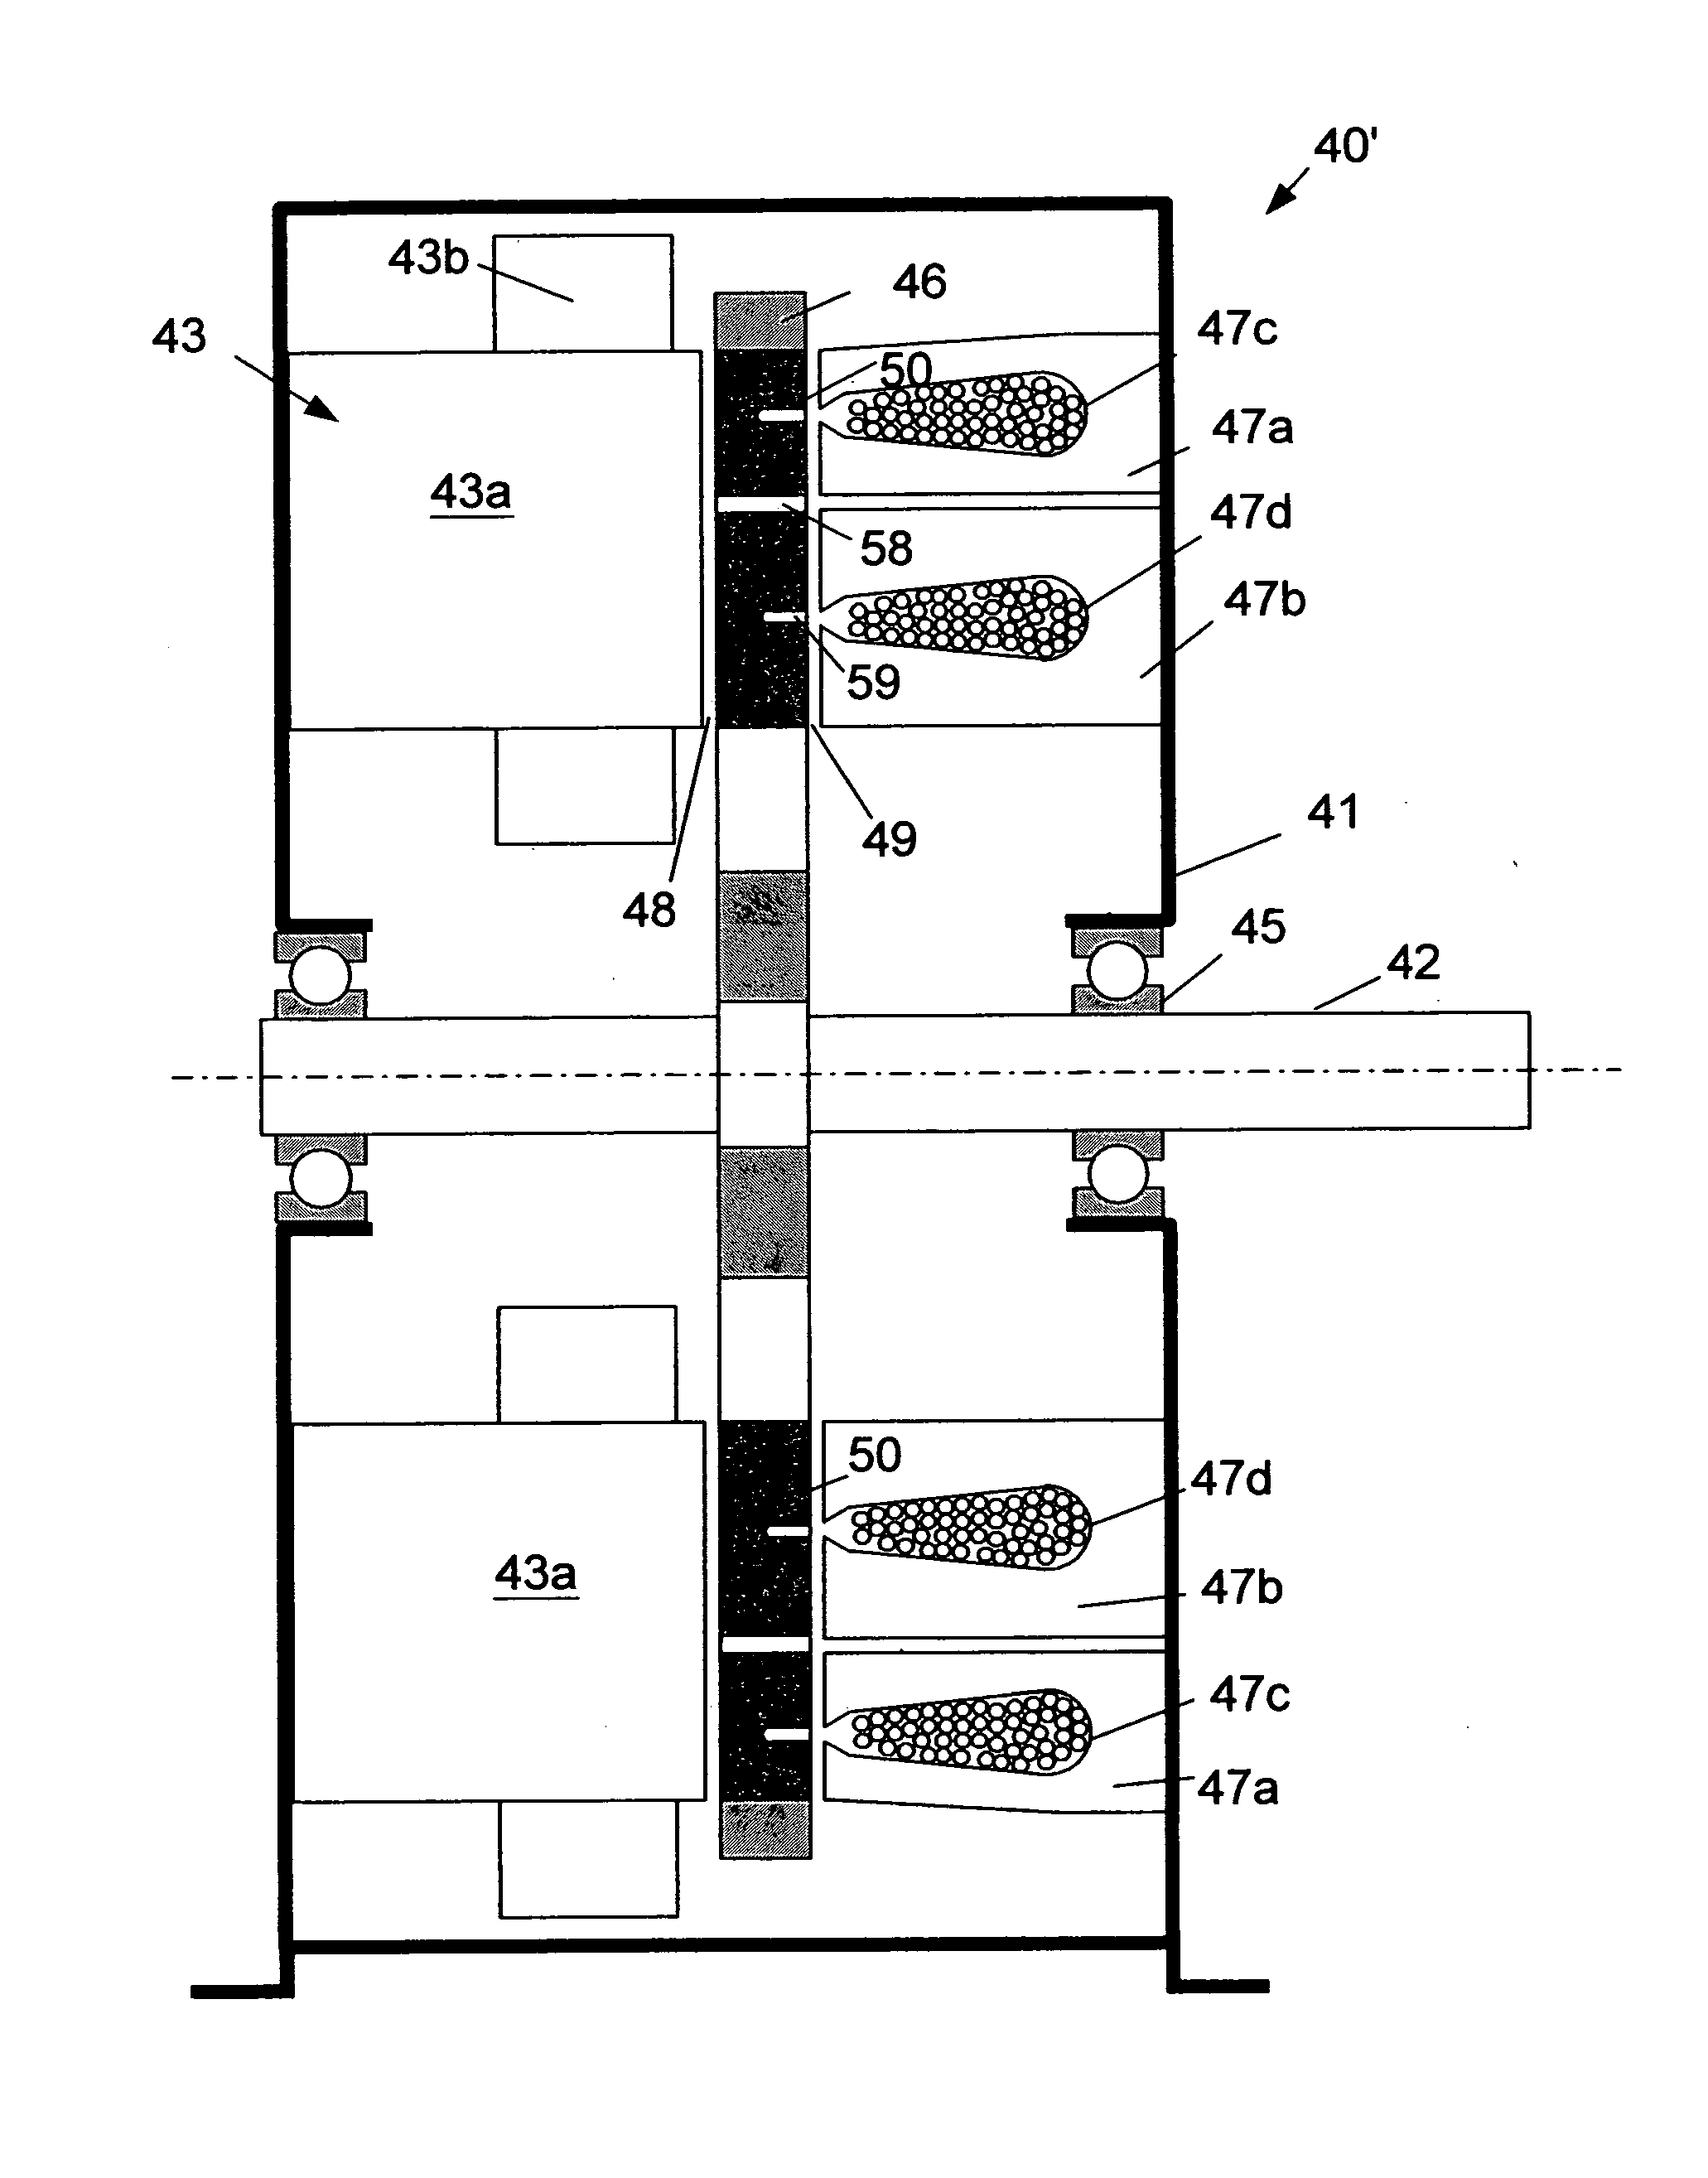 Simplified hybrid-secondary uncluttered machine and method